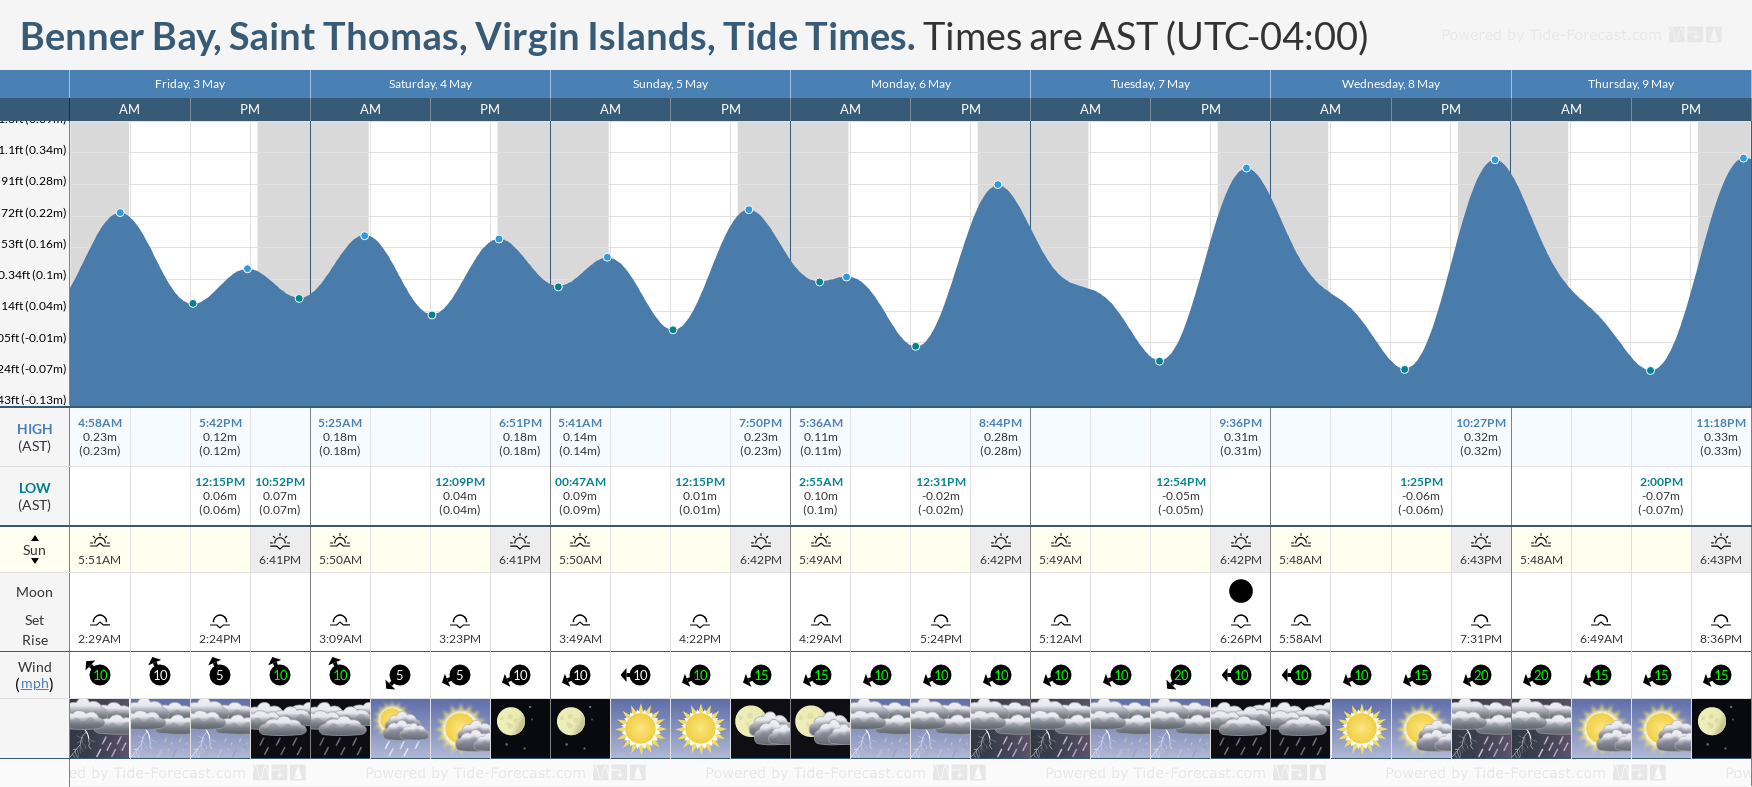 Benner Bay, Saint Thomas, Virgin Islands Tide Chart including high and low tide tide times for the next 7 days